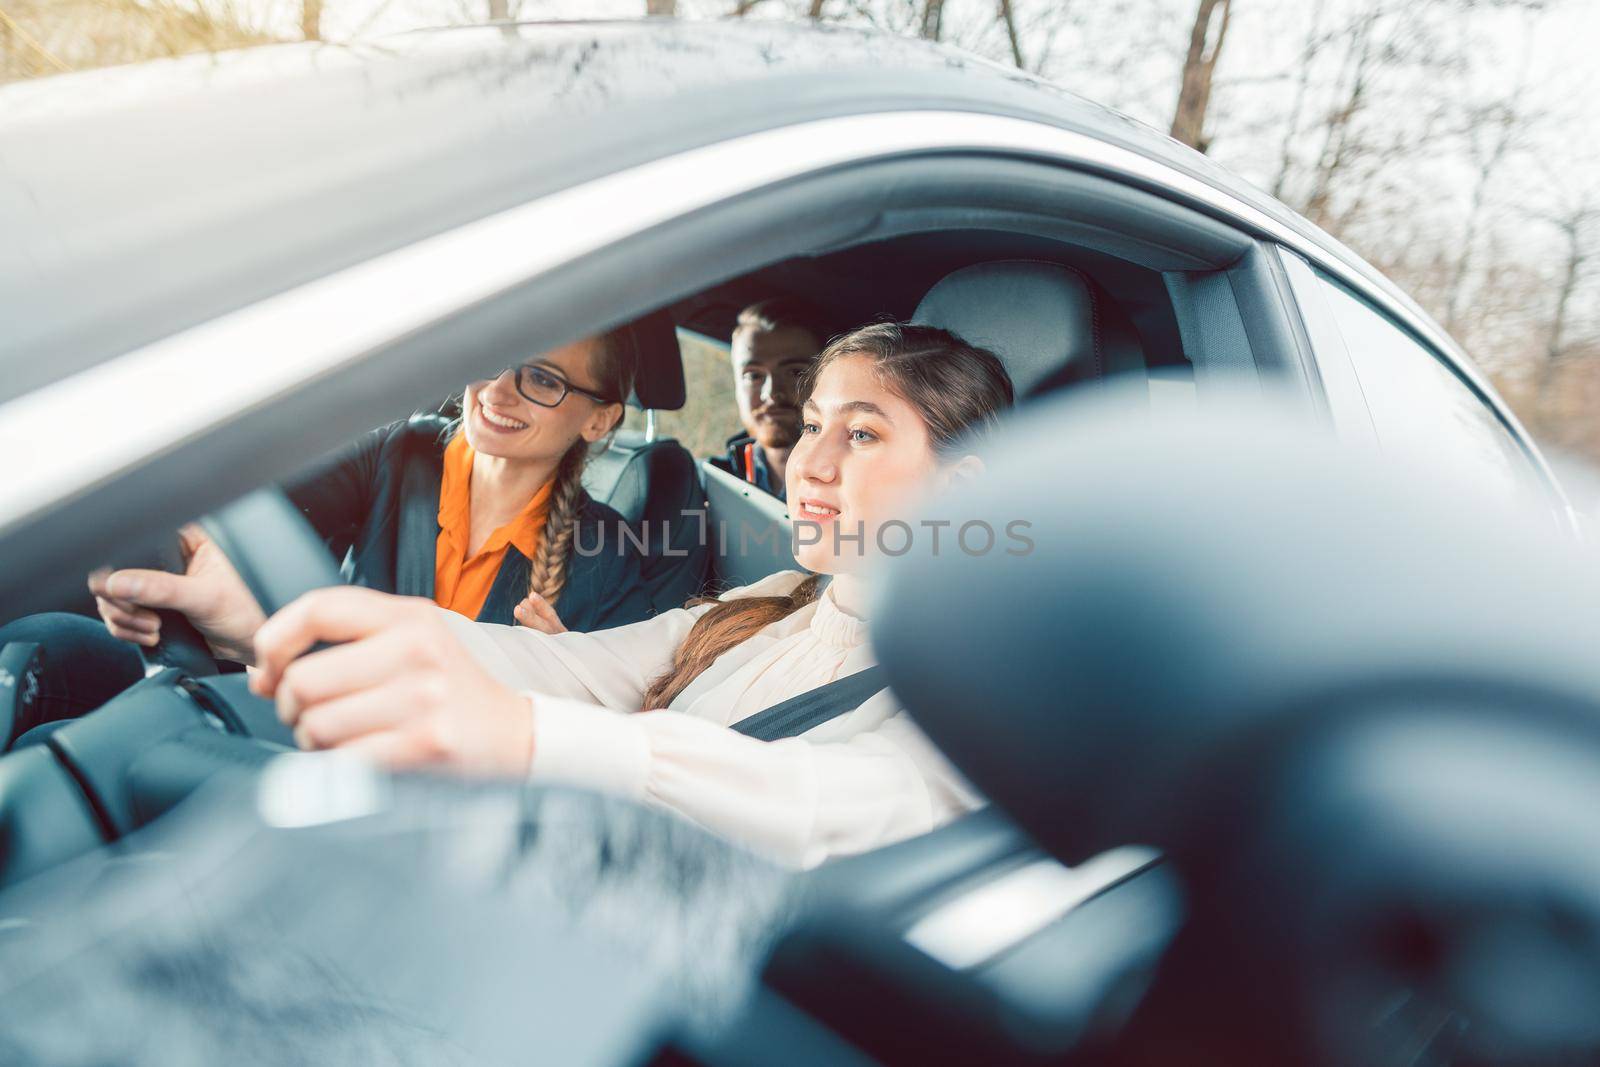 Student in driving school during the final test with instructor and examiner